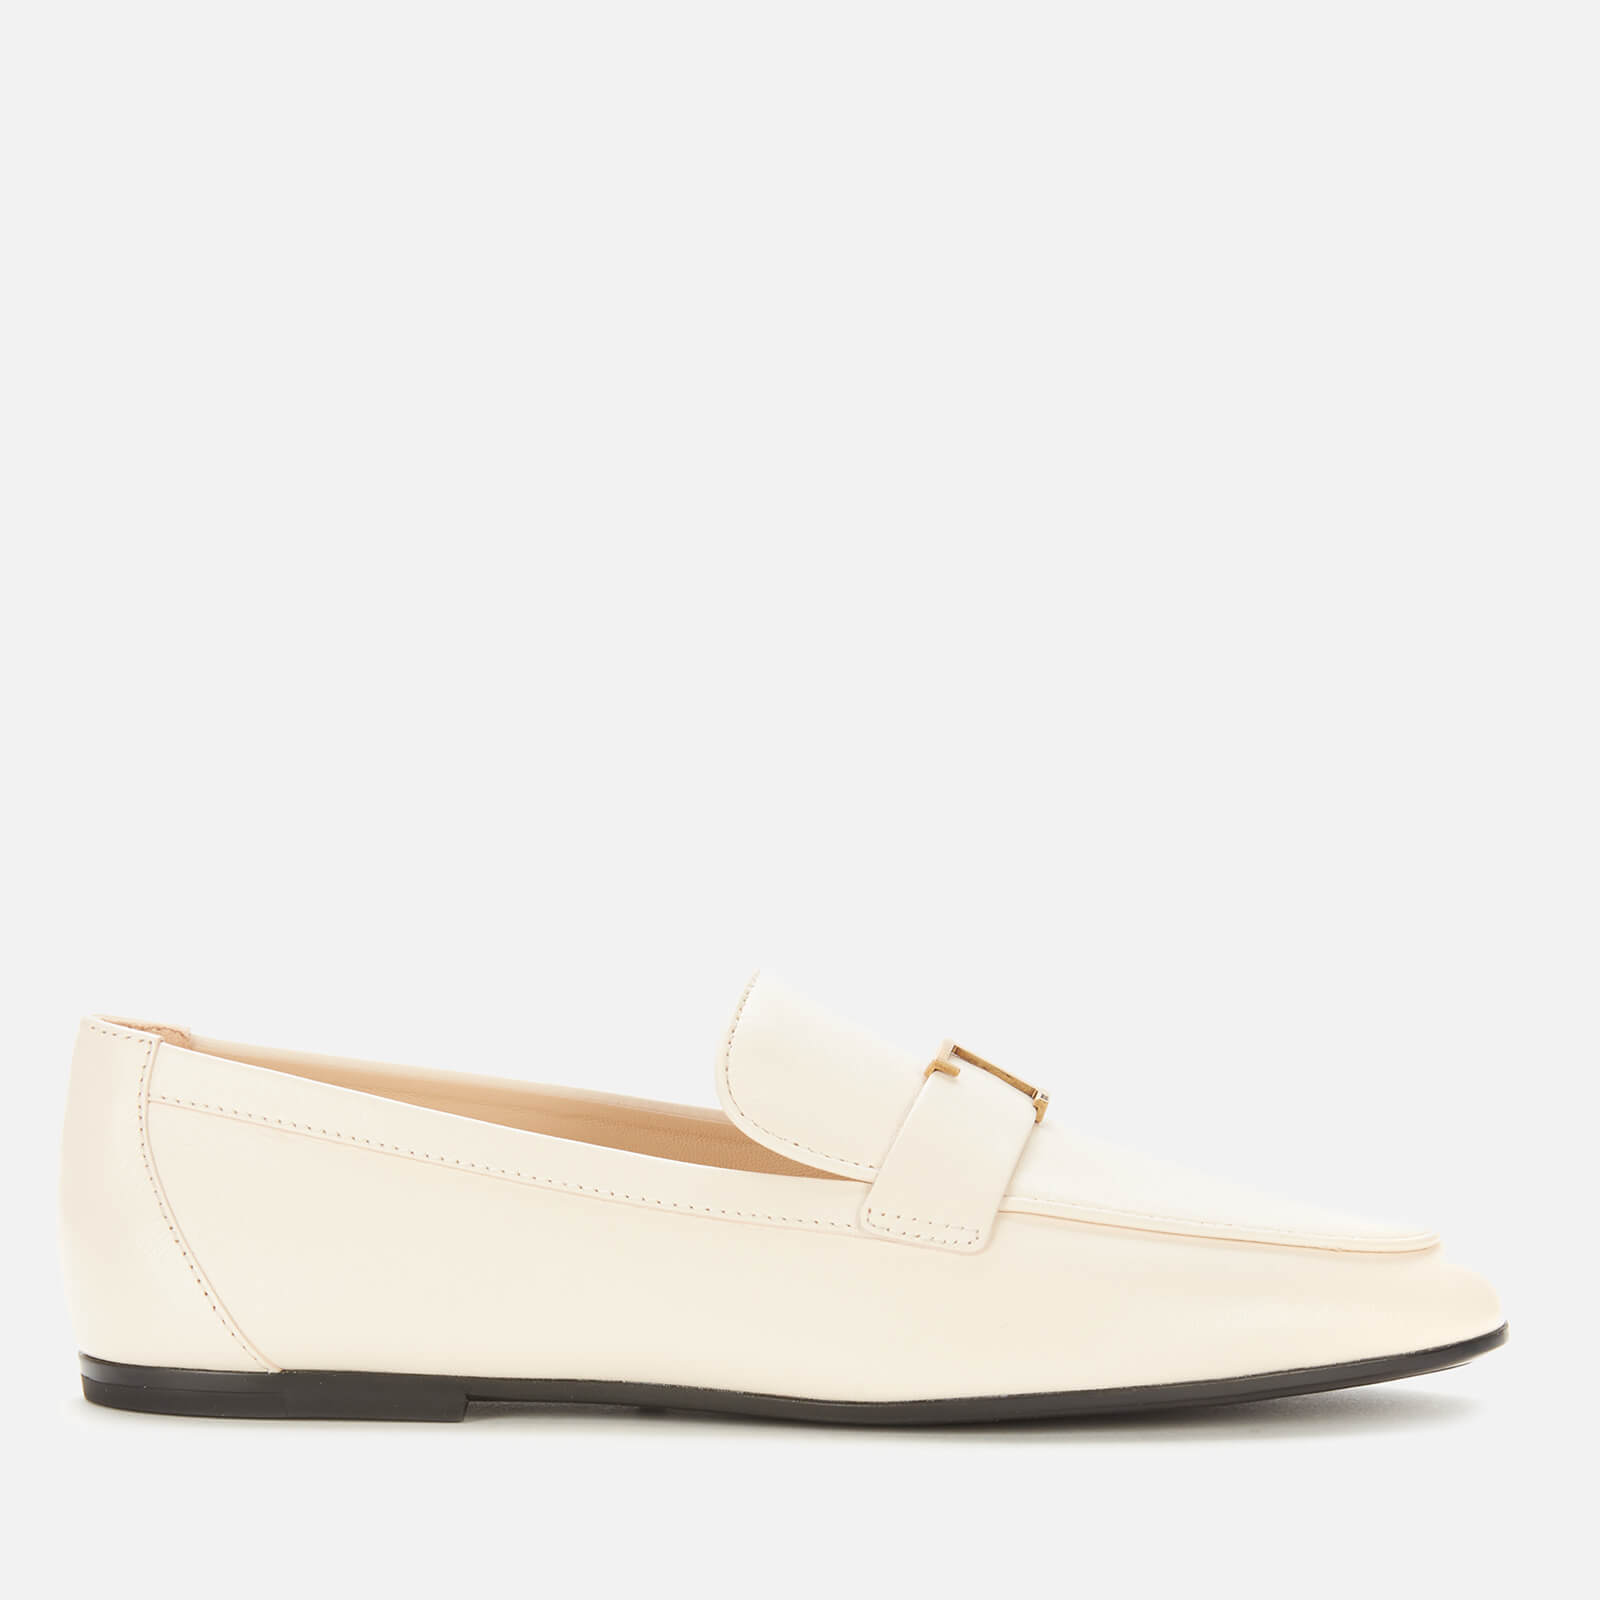 Tod's Women's Gomma Leather Loafers - White - UK 5